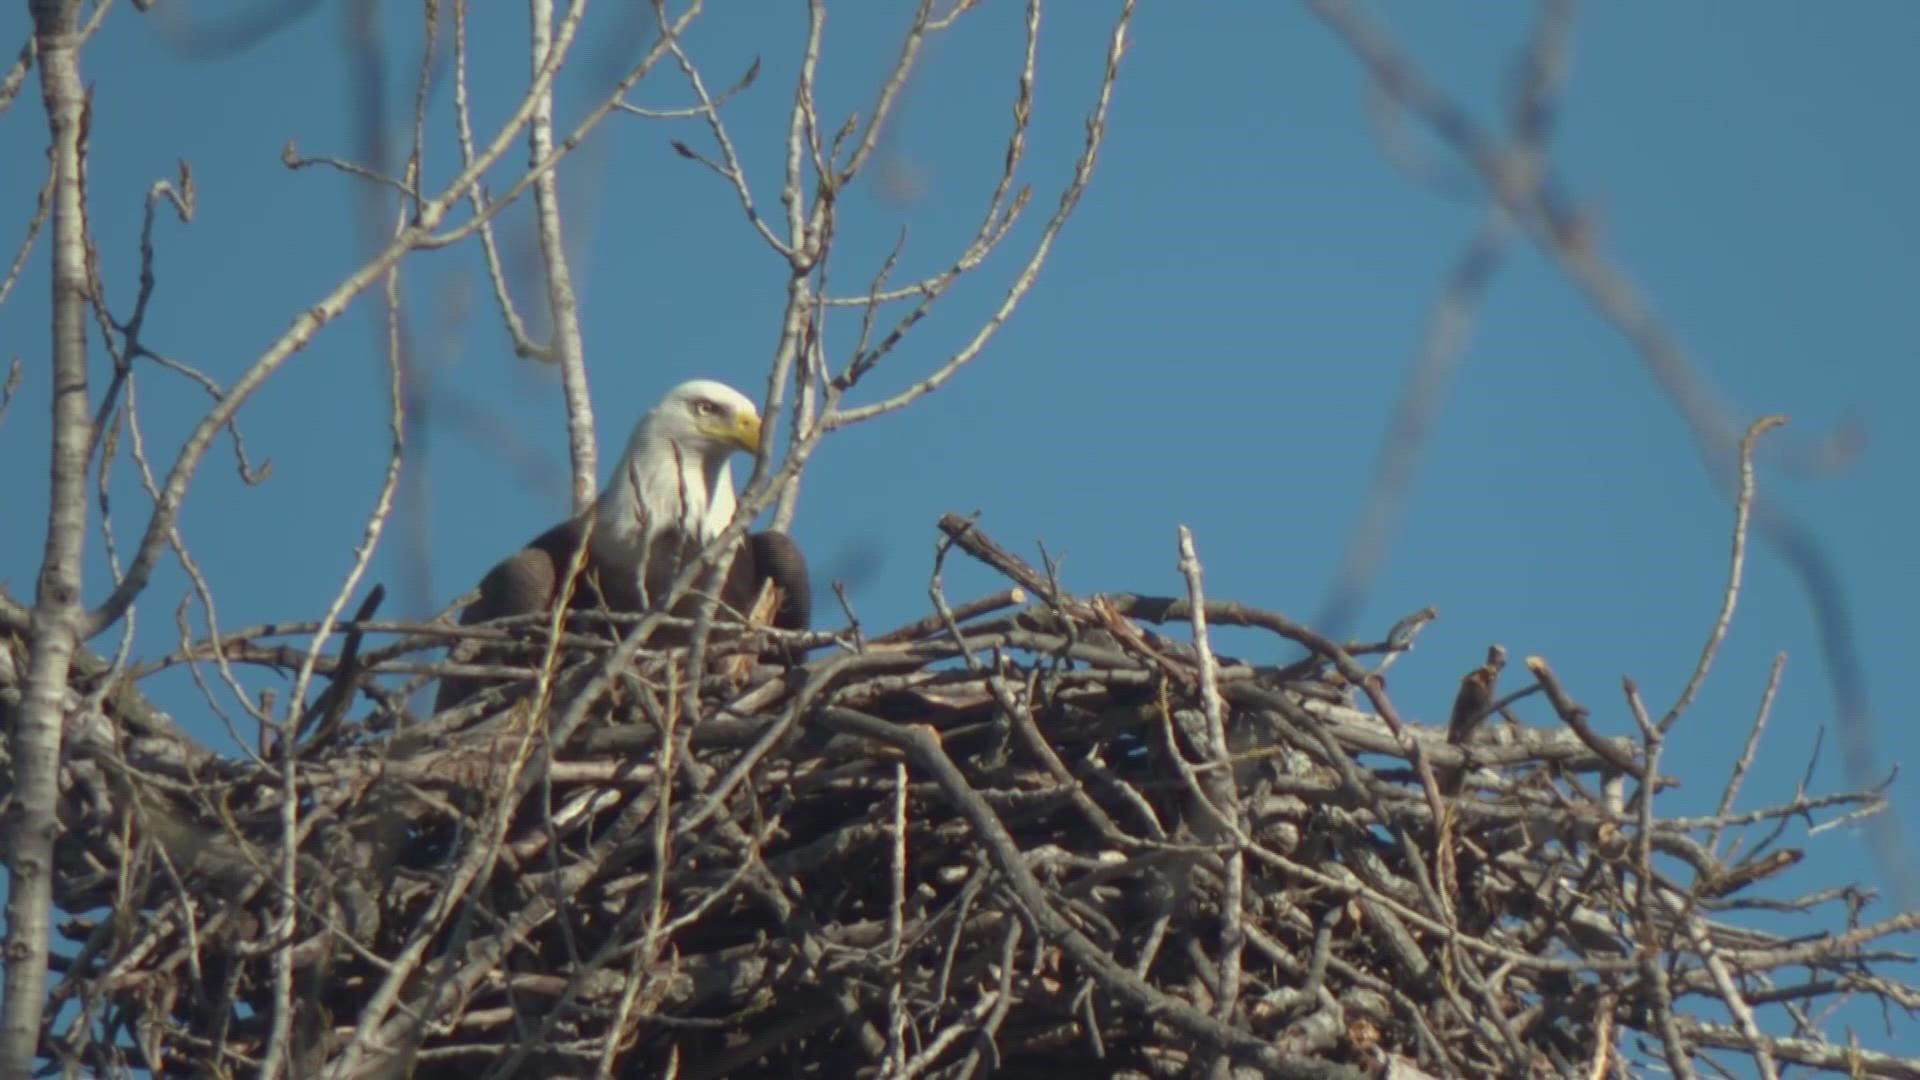 Texas Parks and Wildlife told WFAA the bald eagles took over an abandoned hawk’s nest not far from their old one, which was destroyed by wind in February.